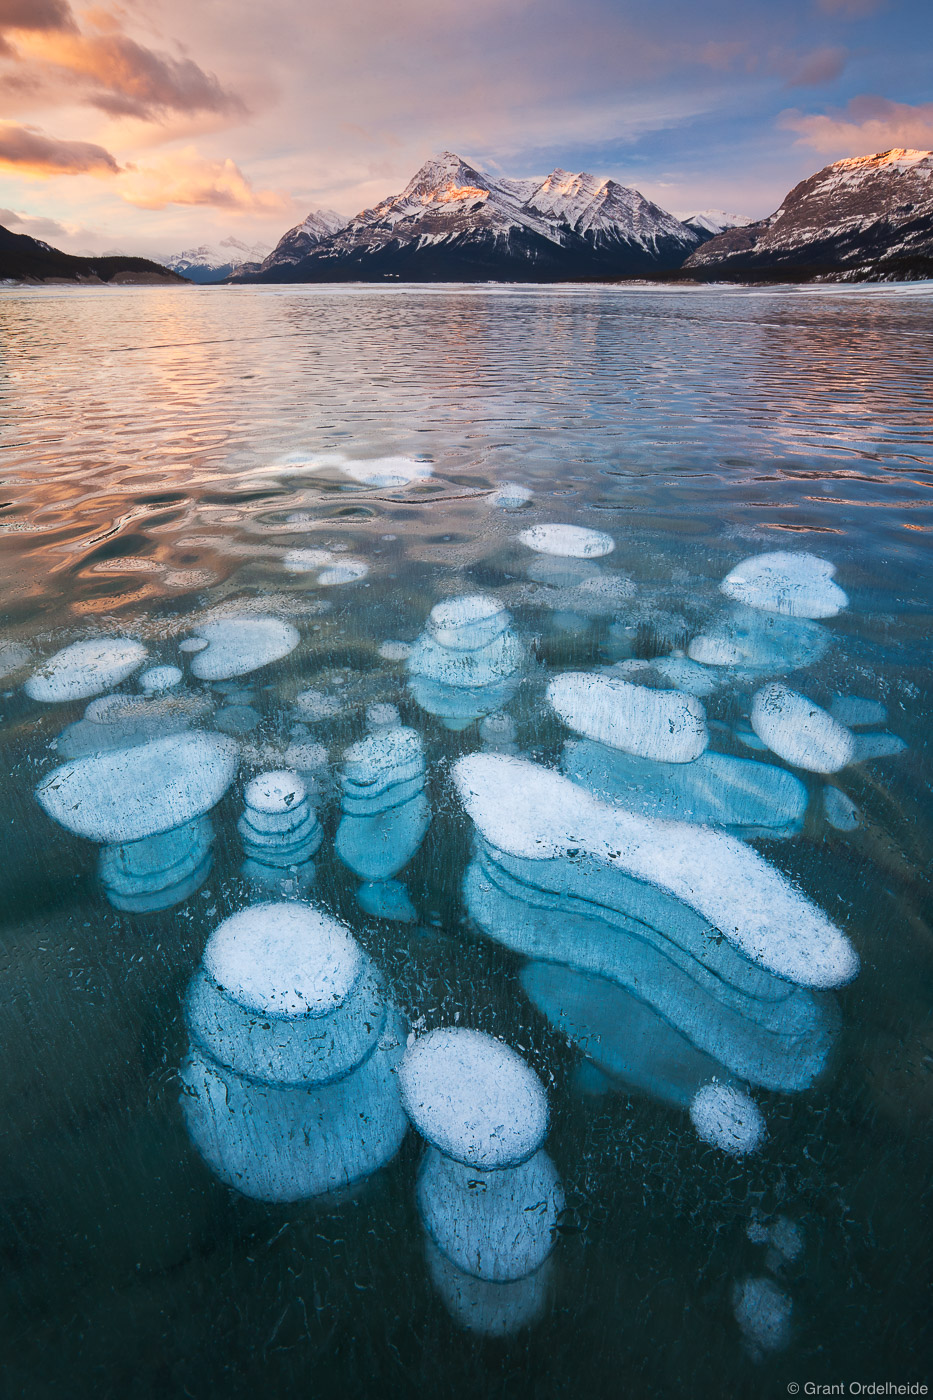 Bubbles formed in the ice on Abraham Lake in the Canadian Rockies.